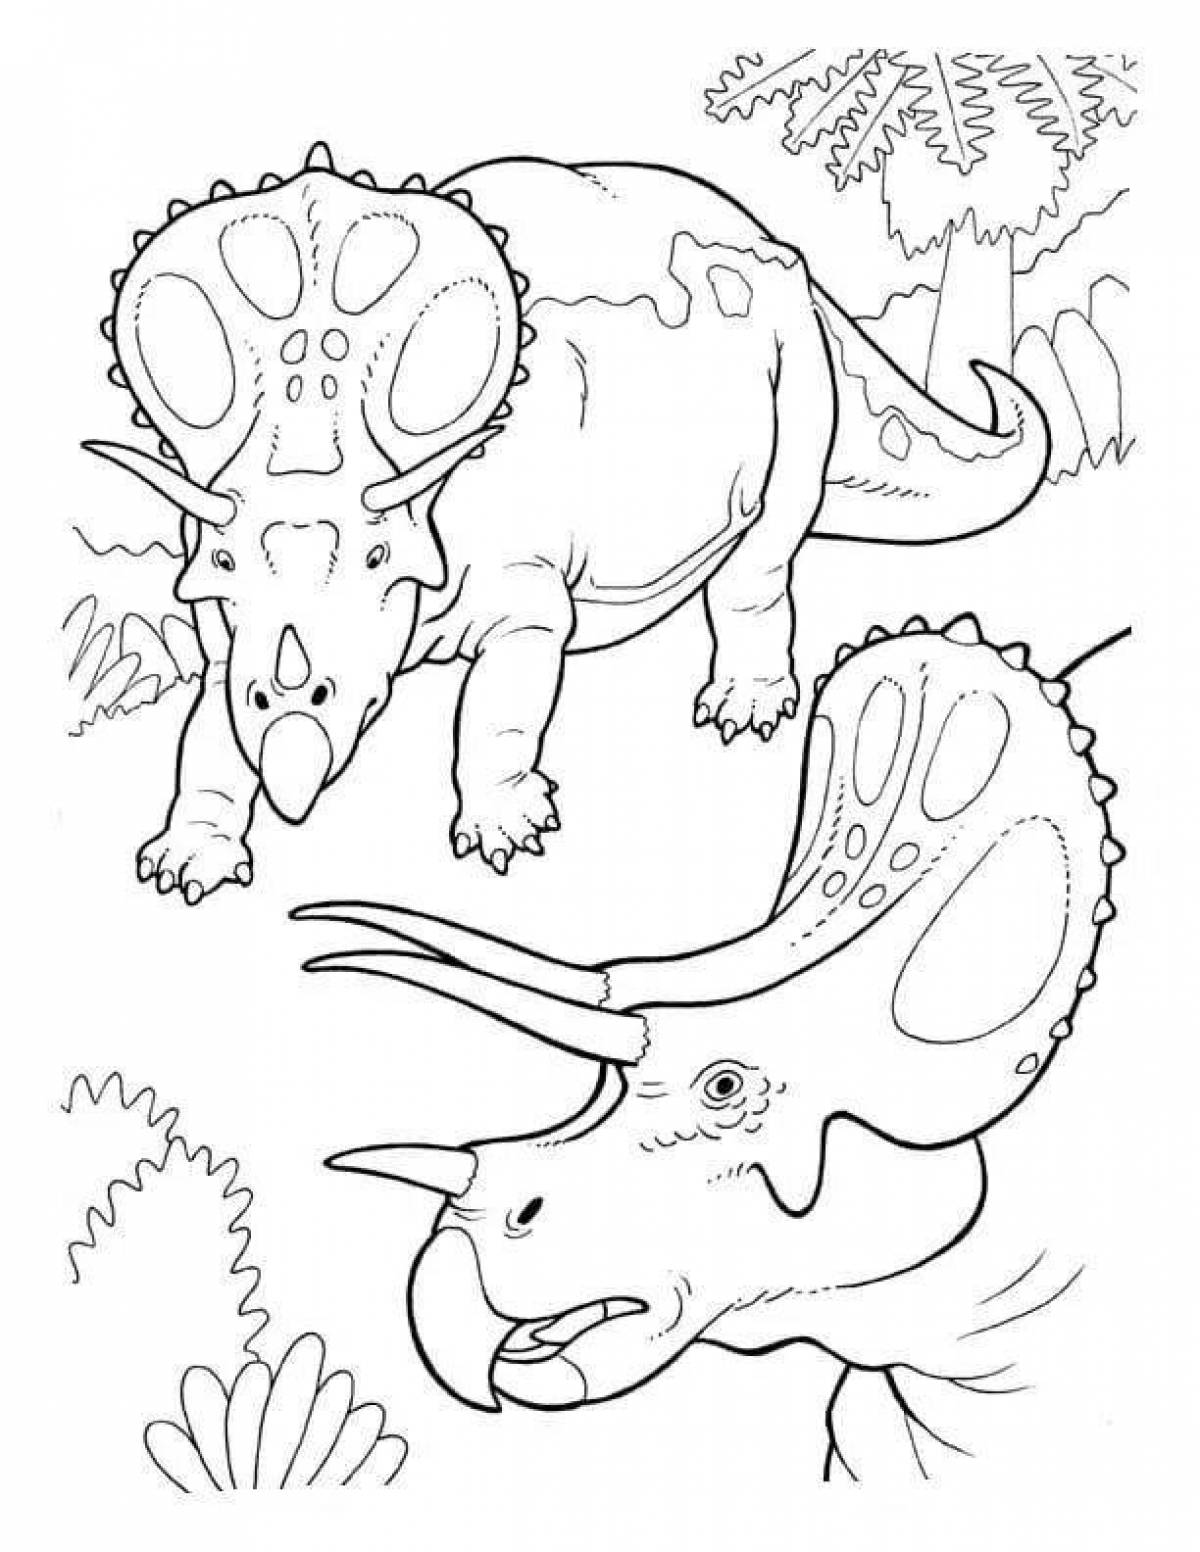 Adorable triceratops dinosaur coloring page